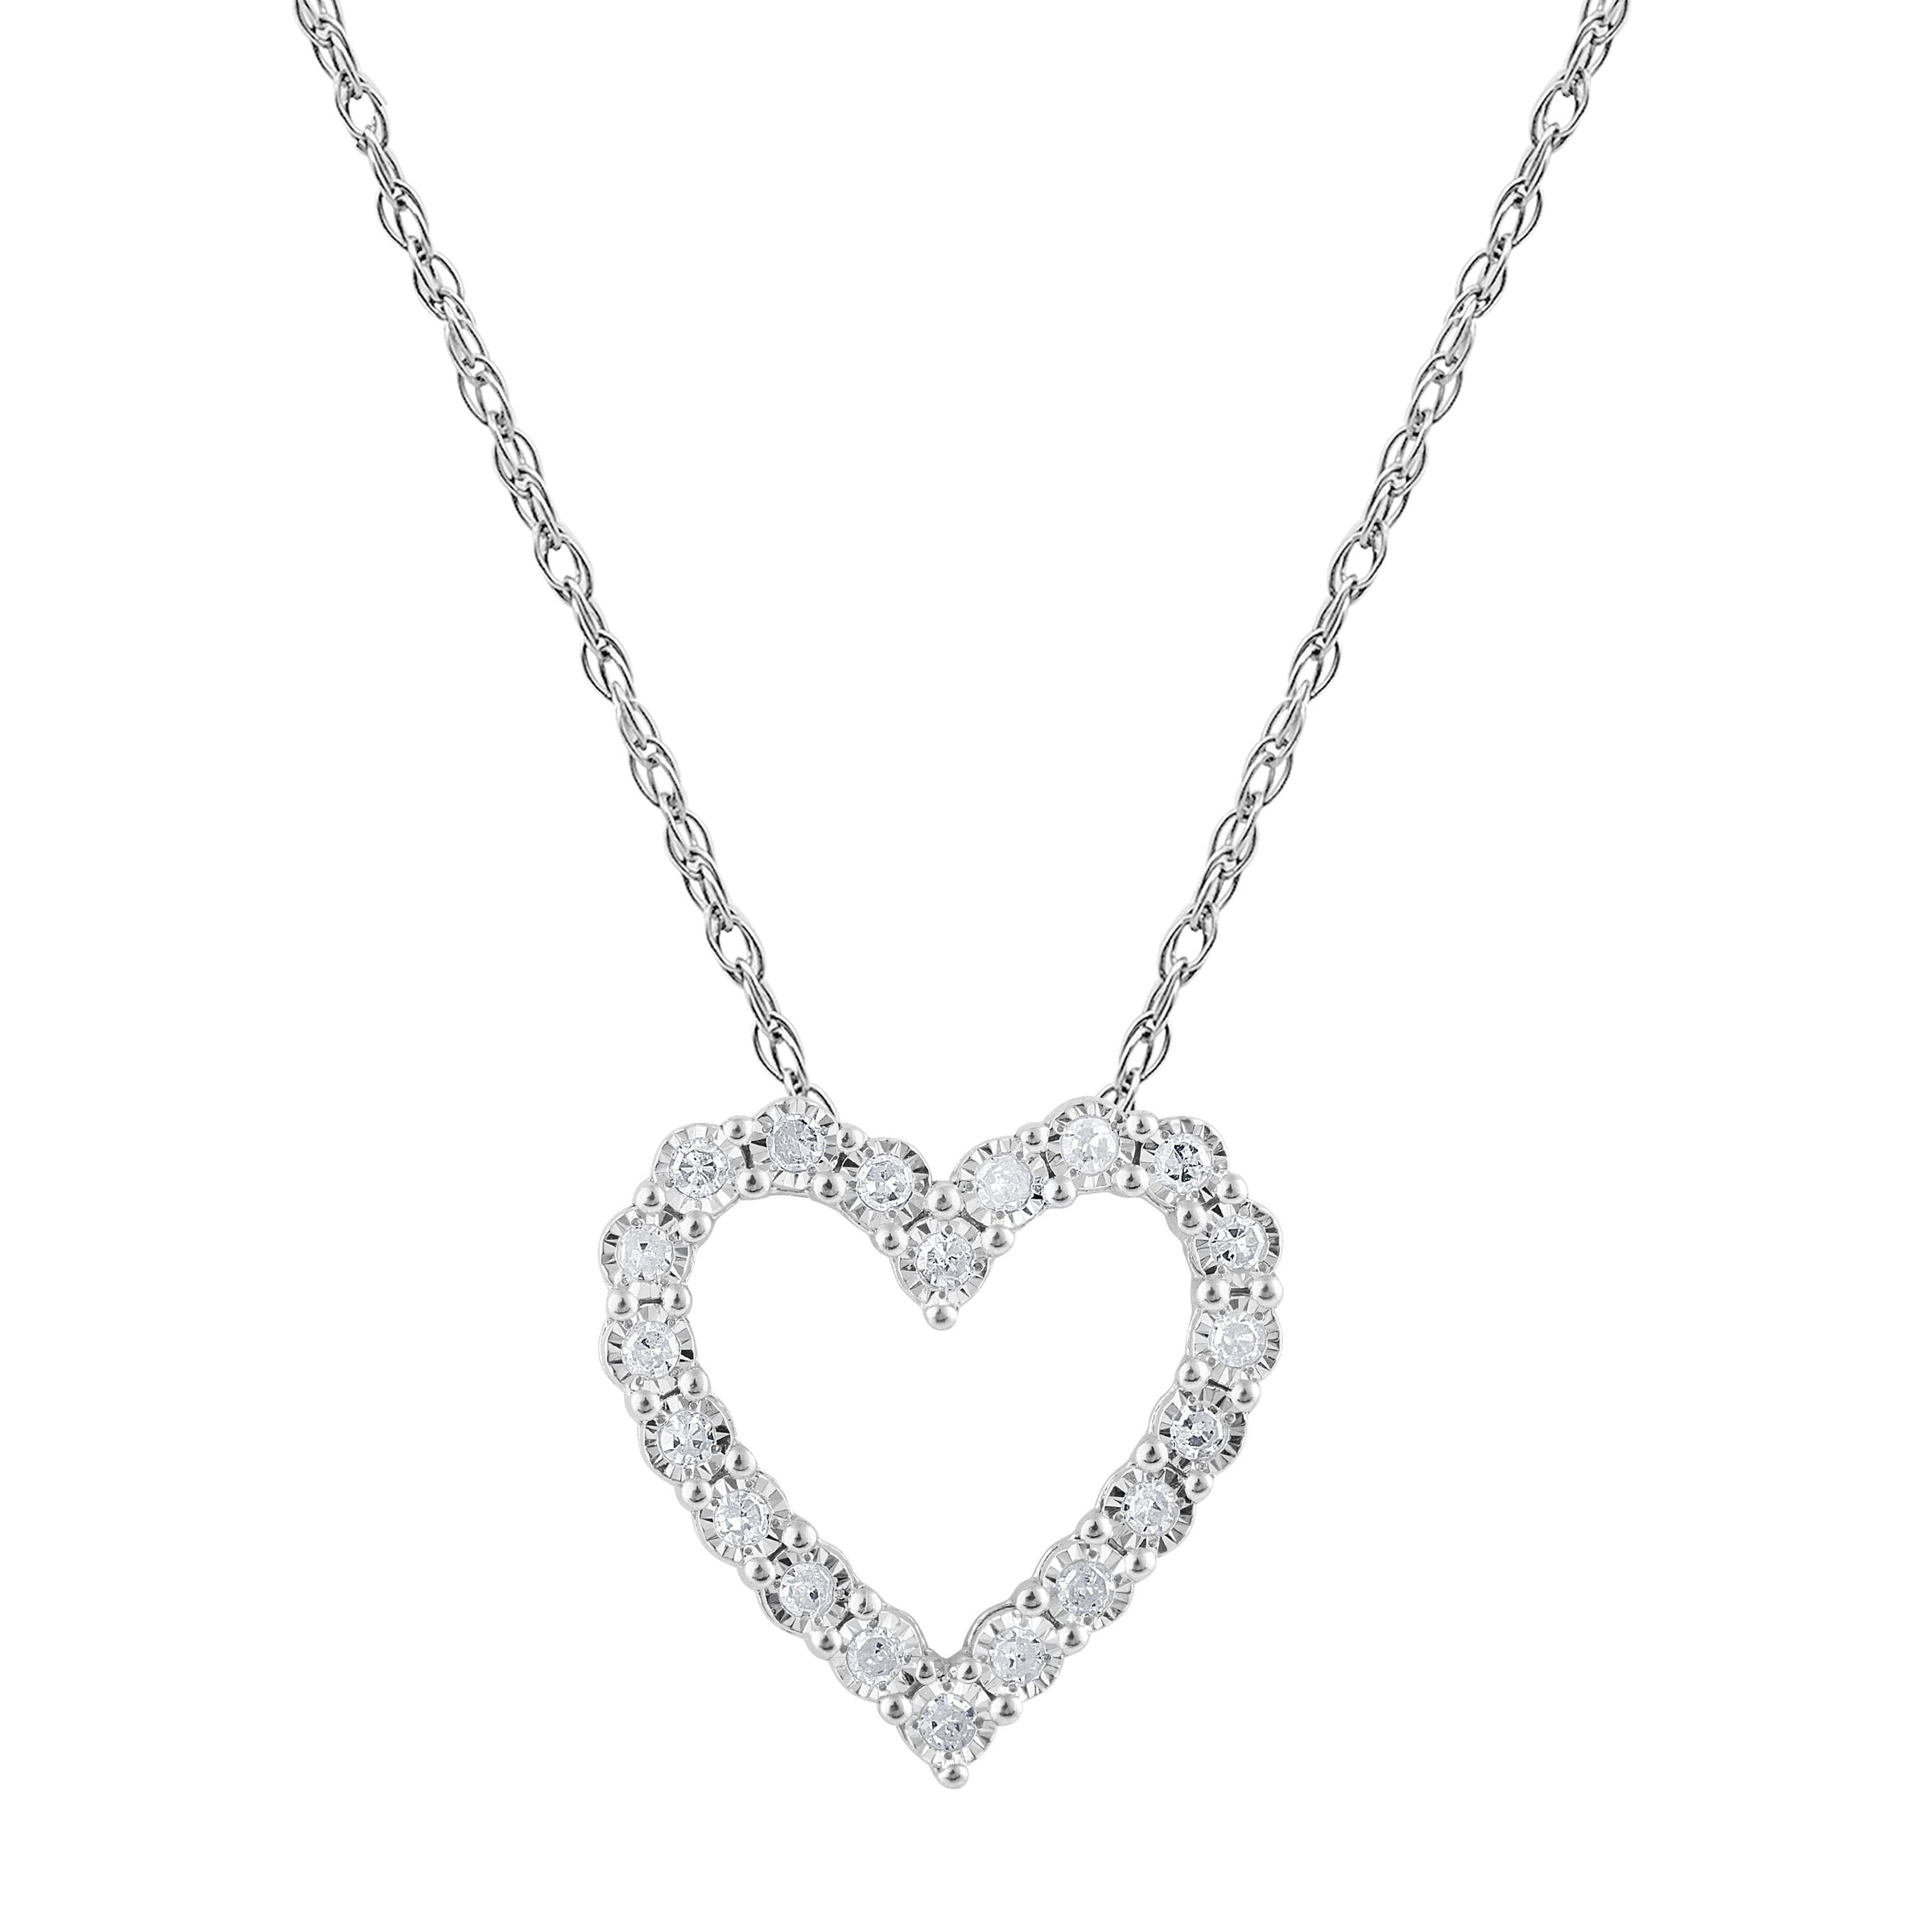 Miracle Open Heart Necklace with 1/4ct of Diamonds in Sterling Silver Necklaces Bevilles 